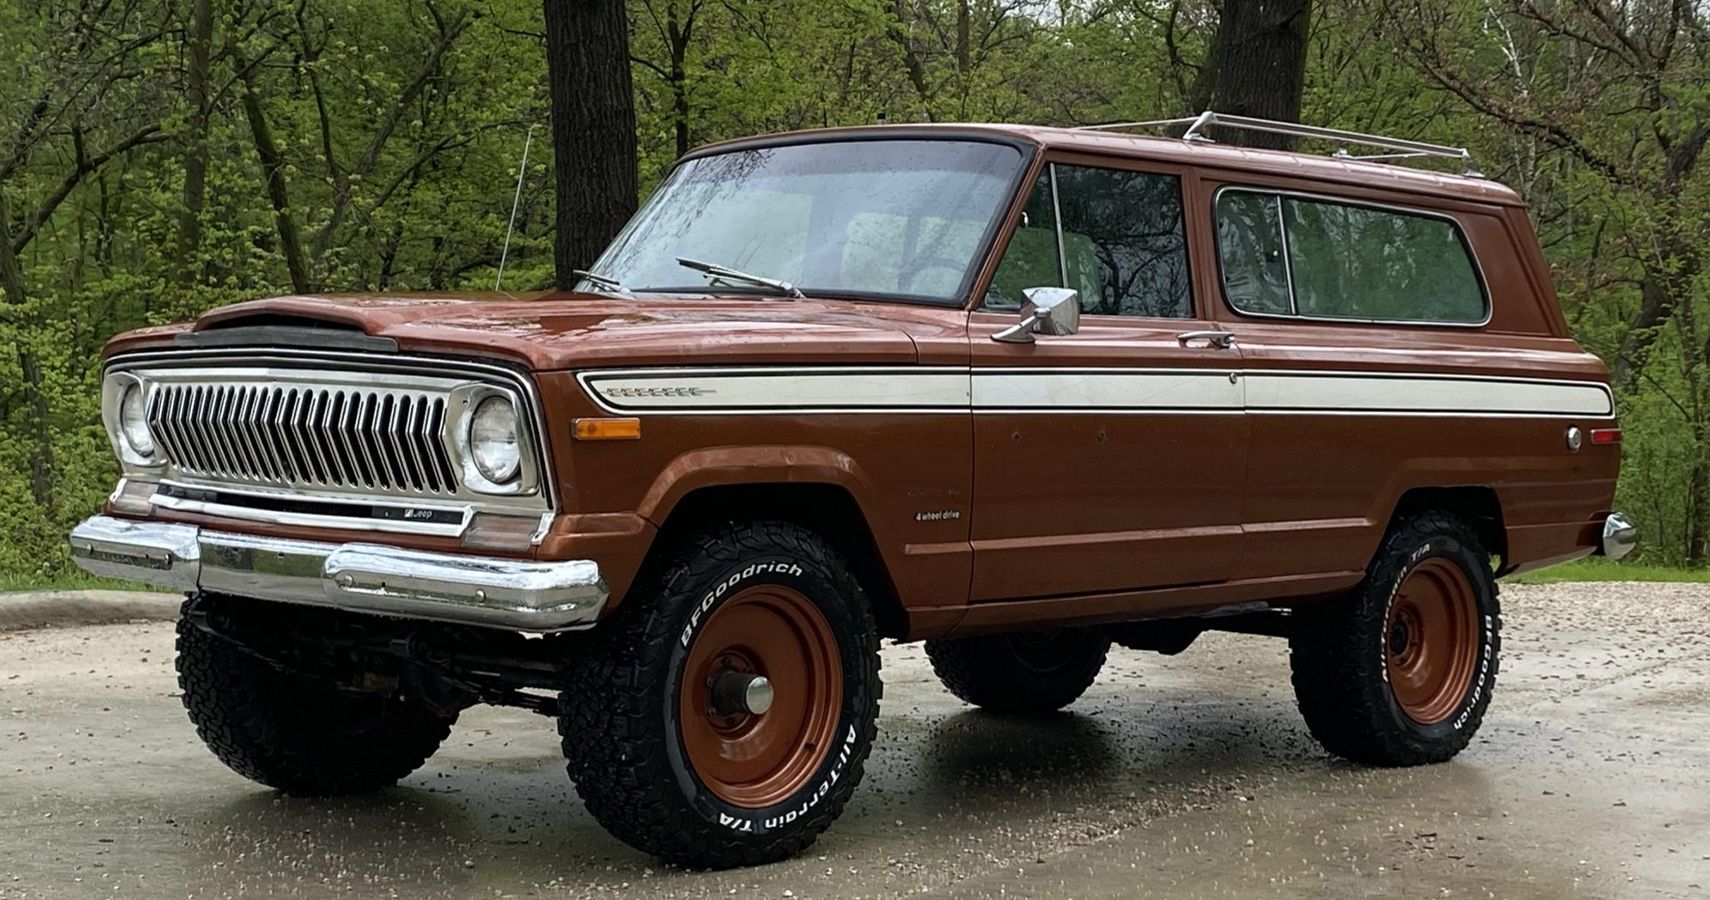 Undoubtedly, The Very First Generation Of The Jeep Cherokee, The One That Existed As Two-Door Trim Of The Jeep Wagoneer Was A Stunner In Looks